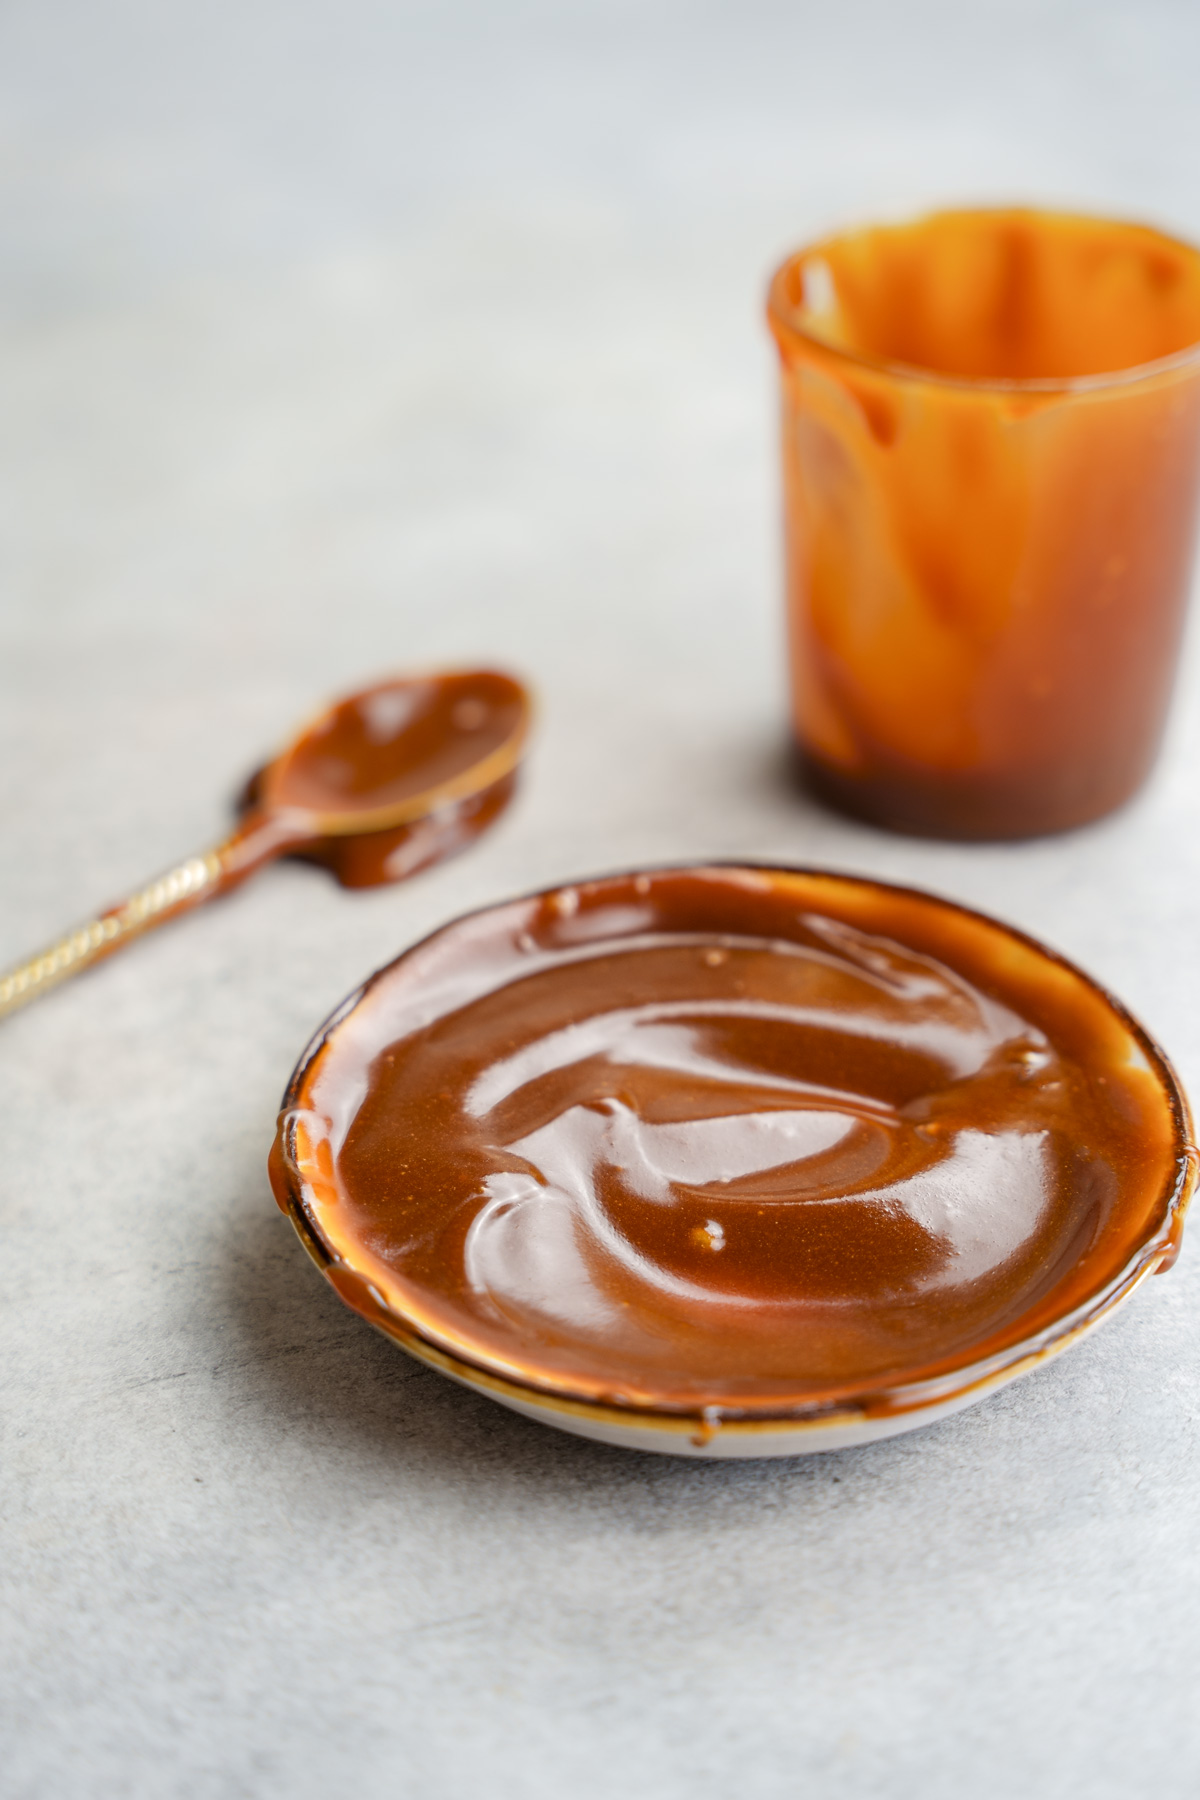 the 2 ingredient vegan date syrup caramel spread on a plate with a caramel covered spoon